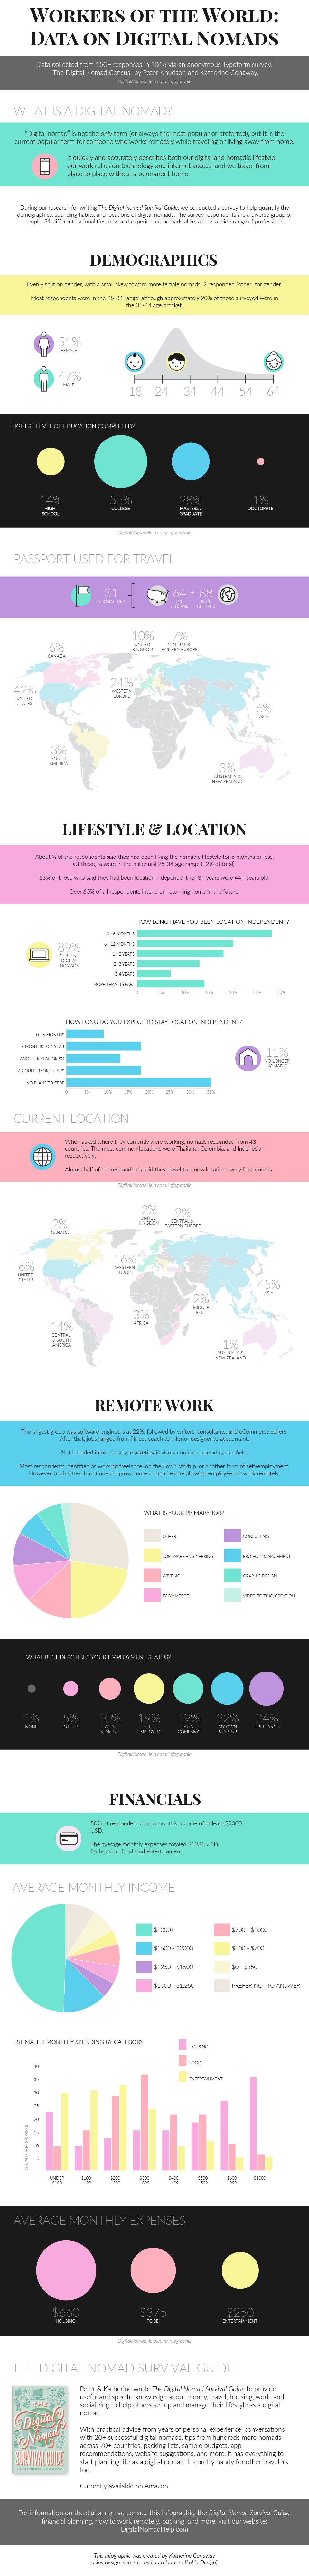 Digital Nomad Help Infographic data demographic remote work financial spending income location lifestyle